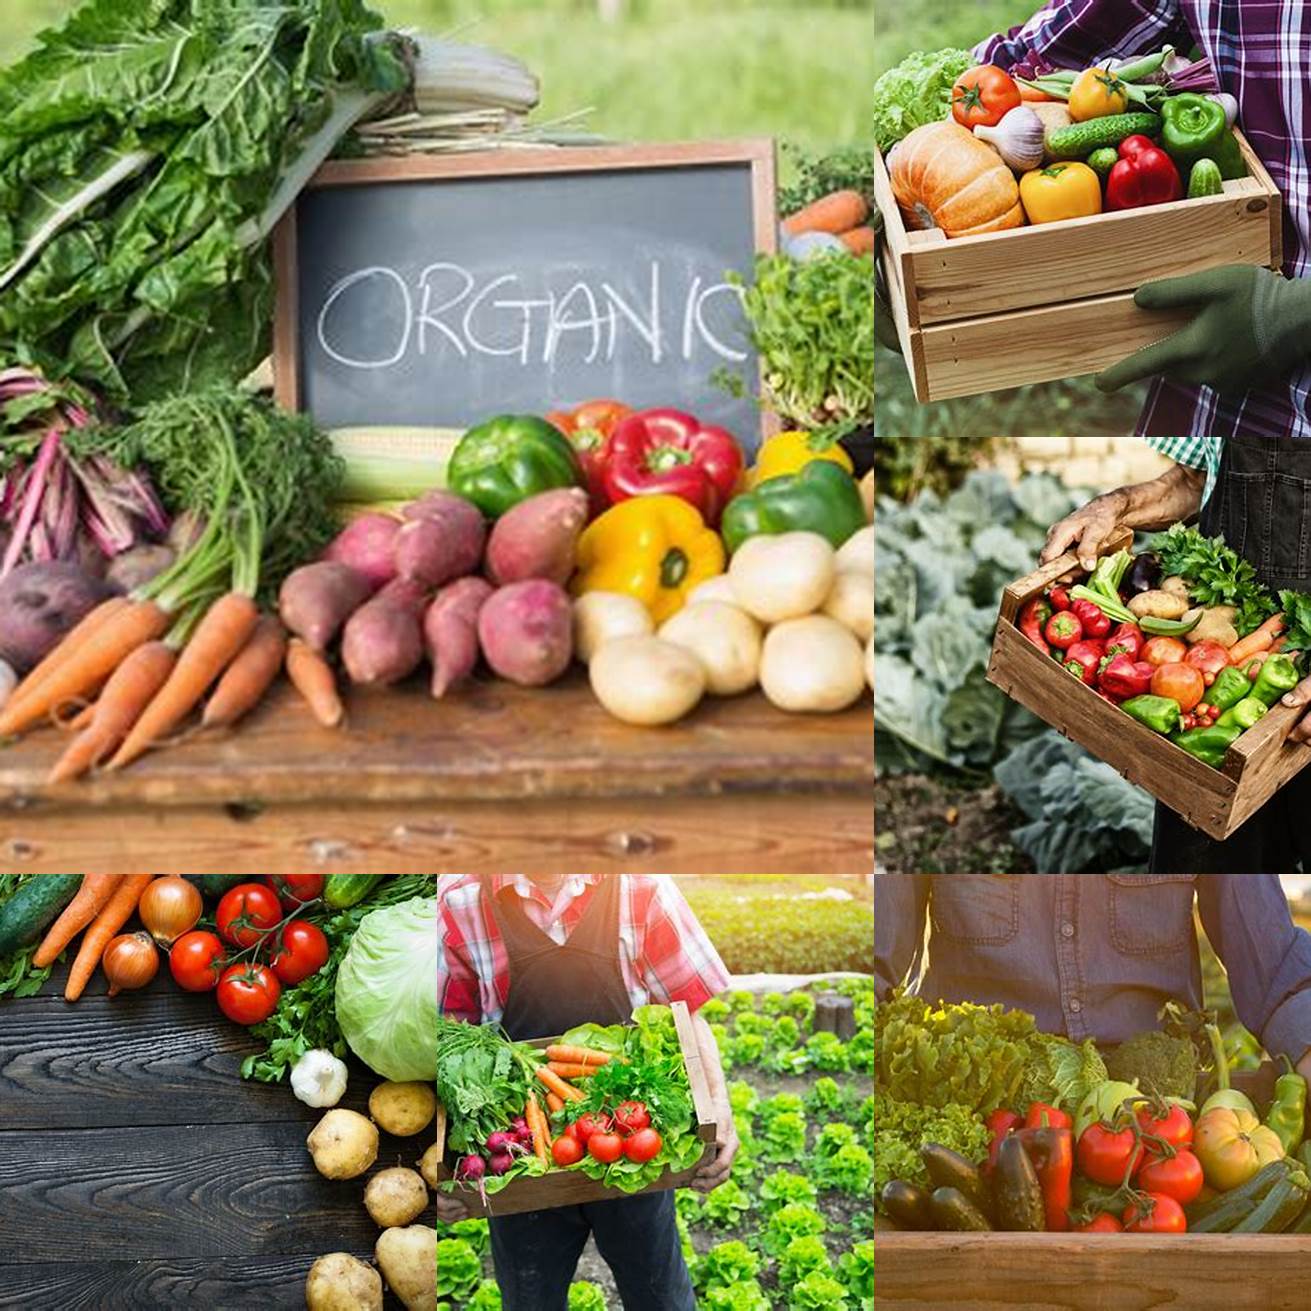 Local and organic produce